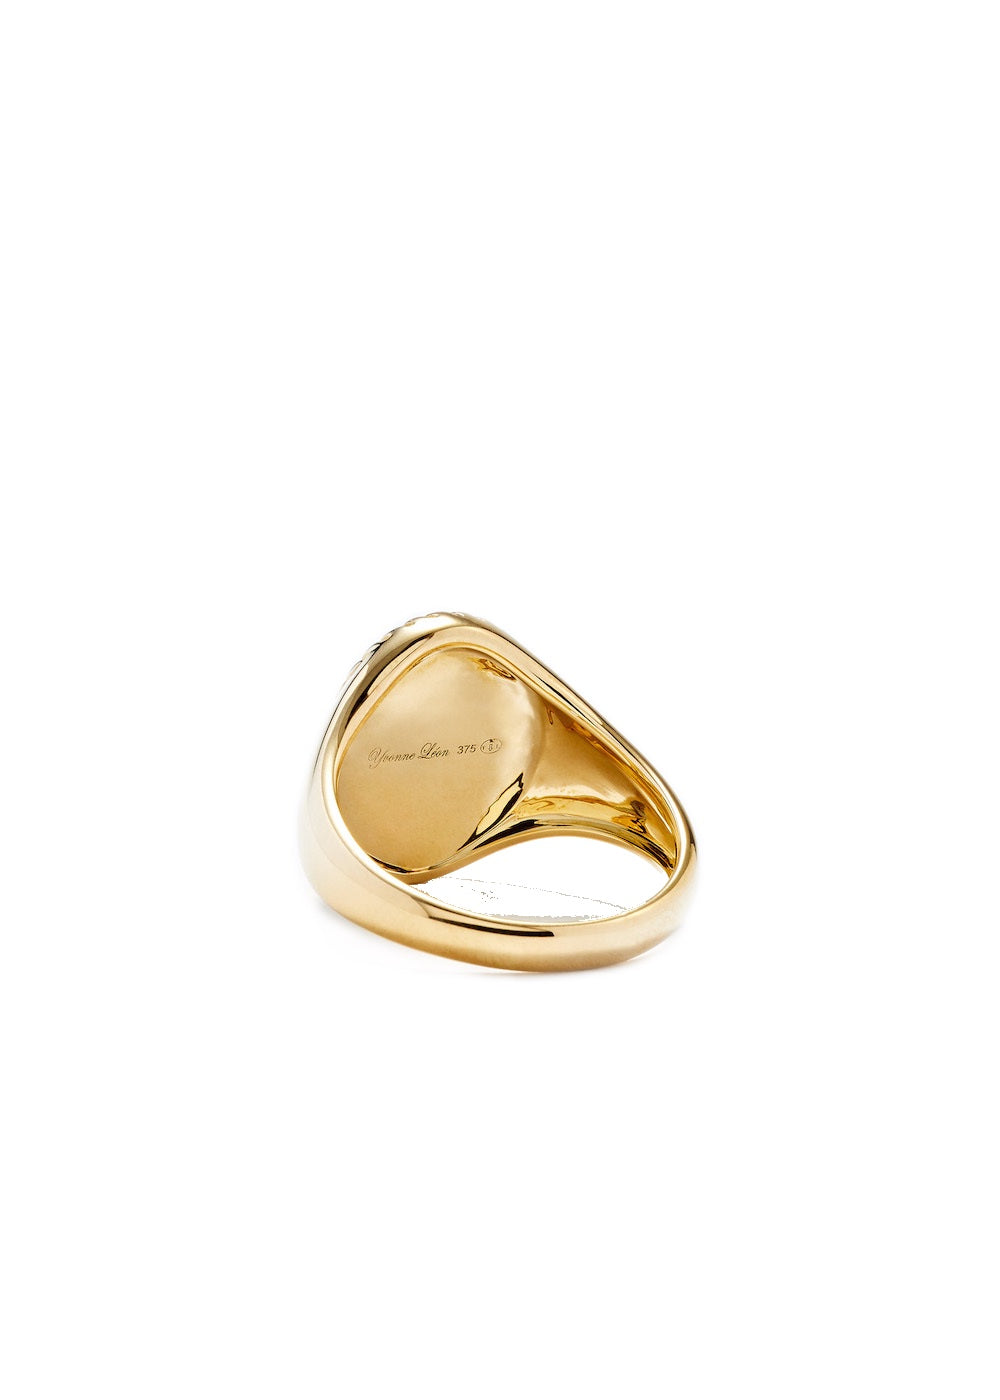 Chevalière Ovale 9k yellow gold, diamond and onyx signet ring